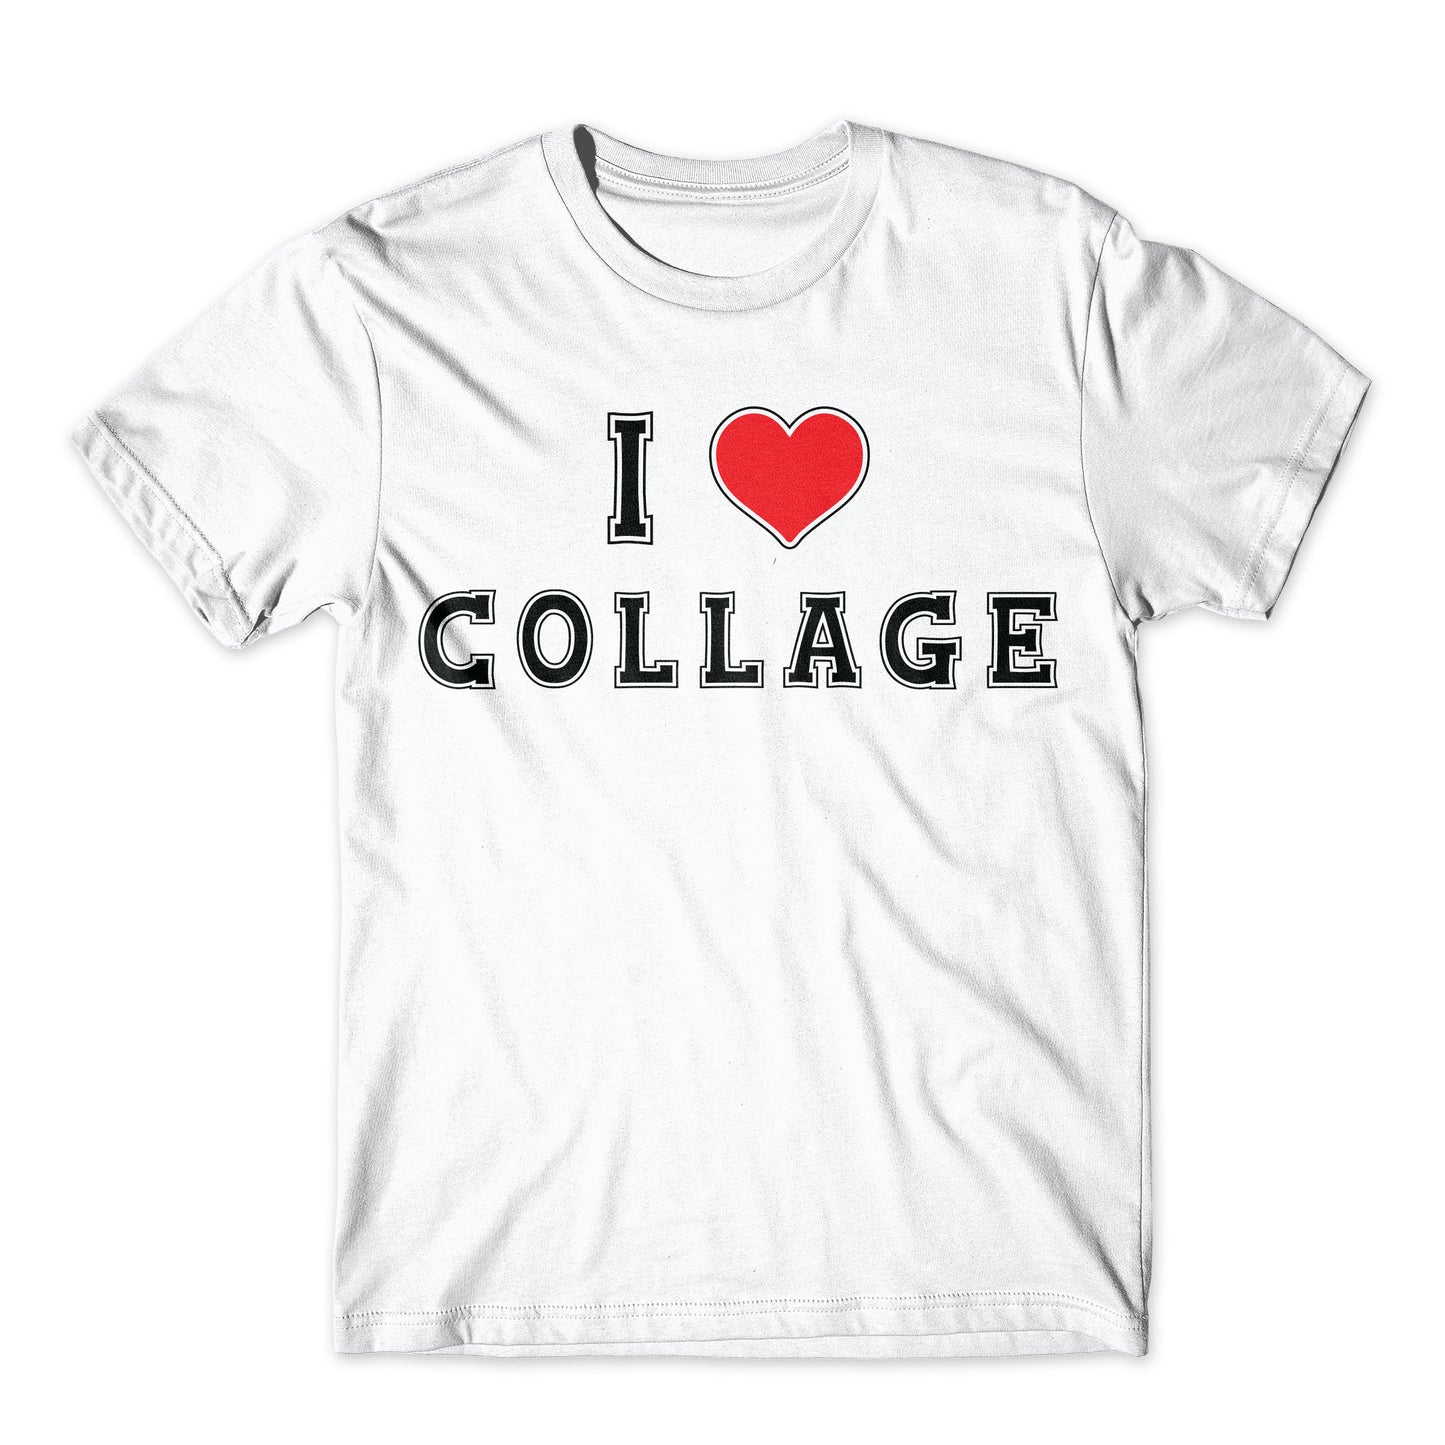 I Love Collage Shirt. On Black, White, or Gray Soft Cotton  Premium Shirt. Funny College Tee. Comfy!